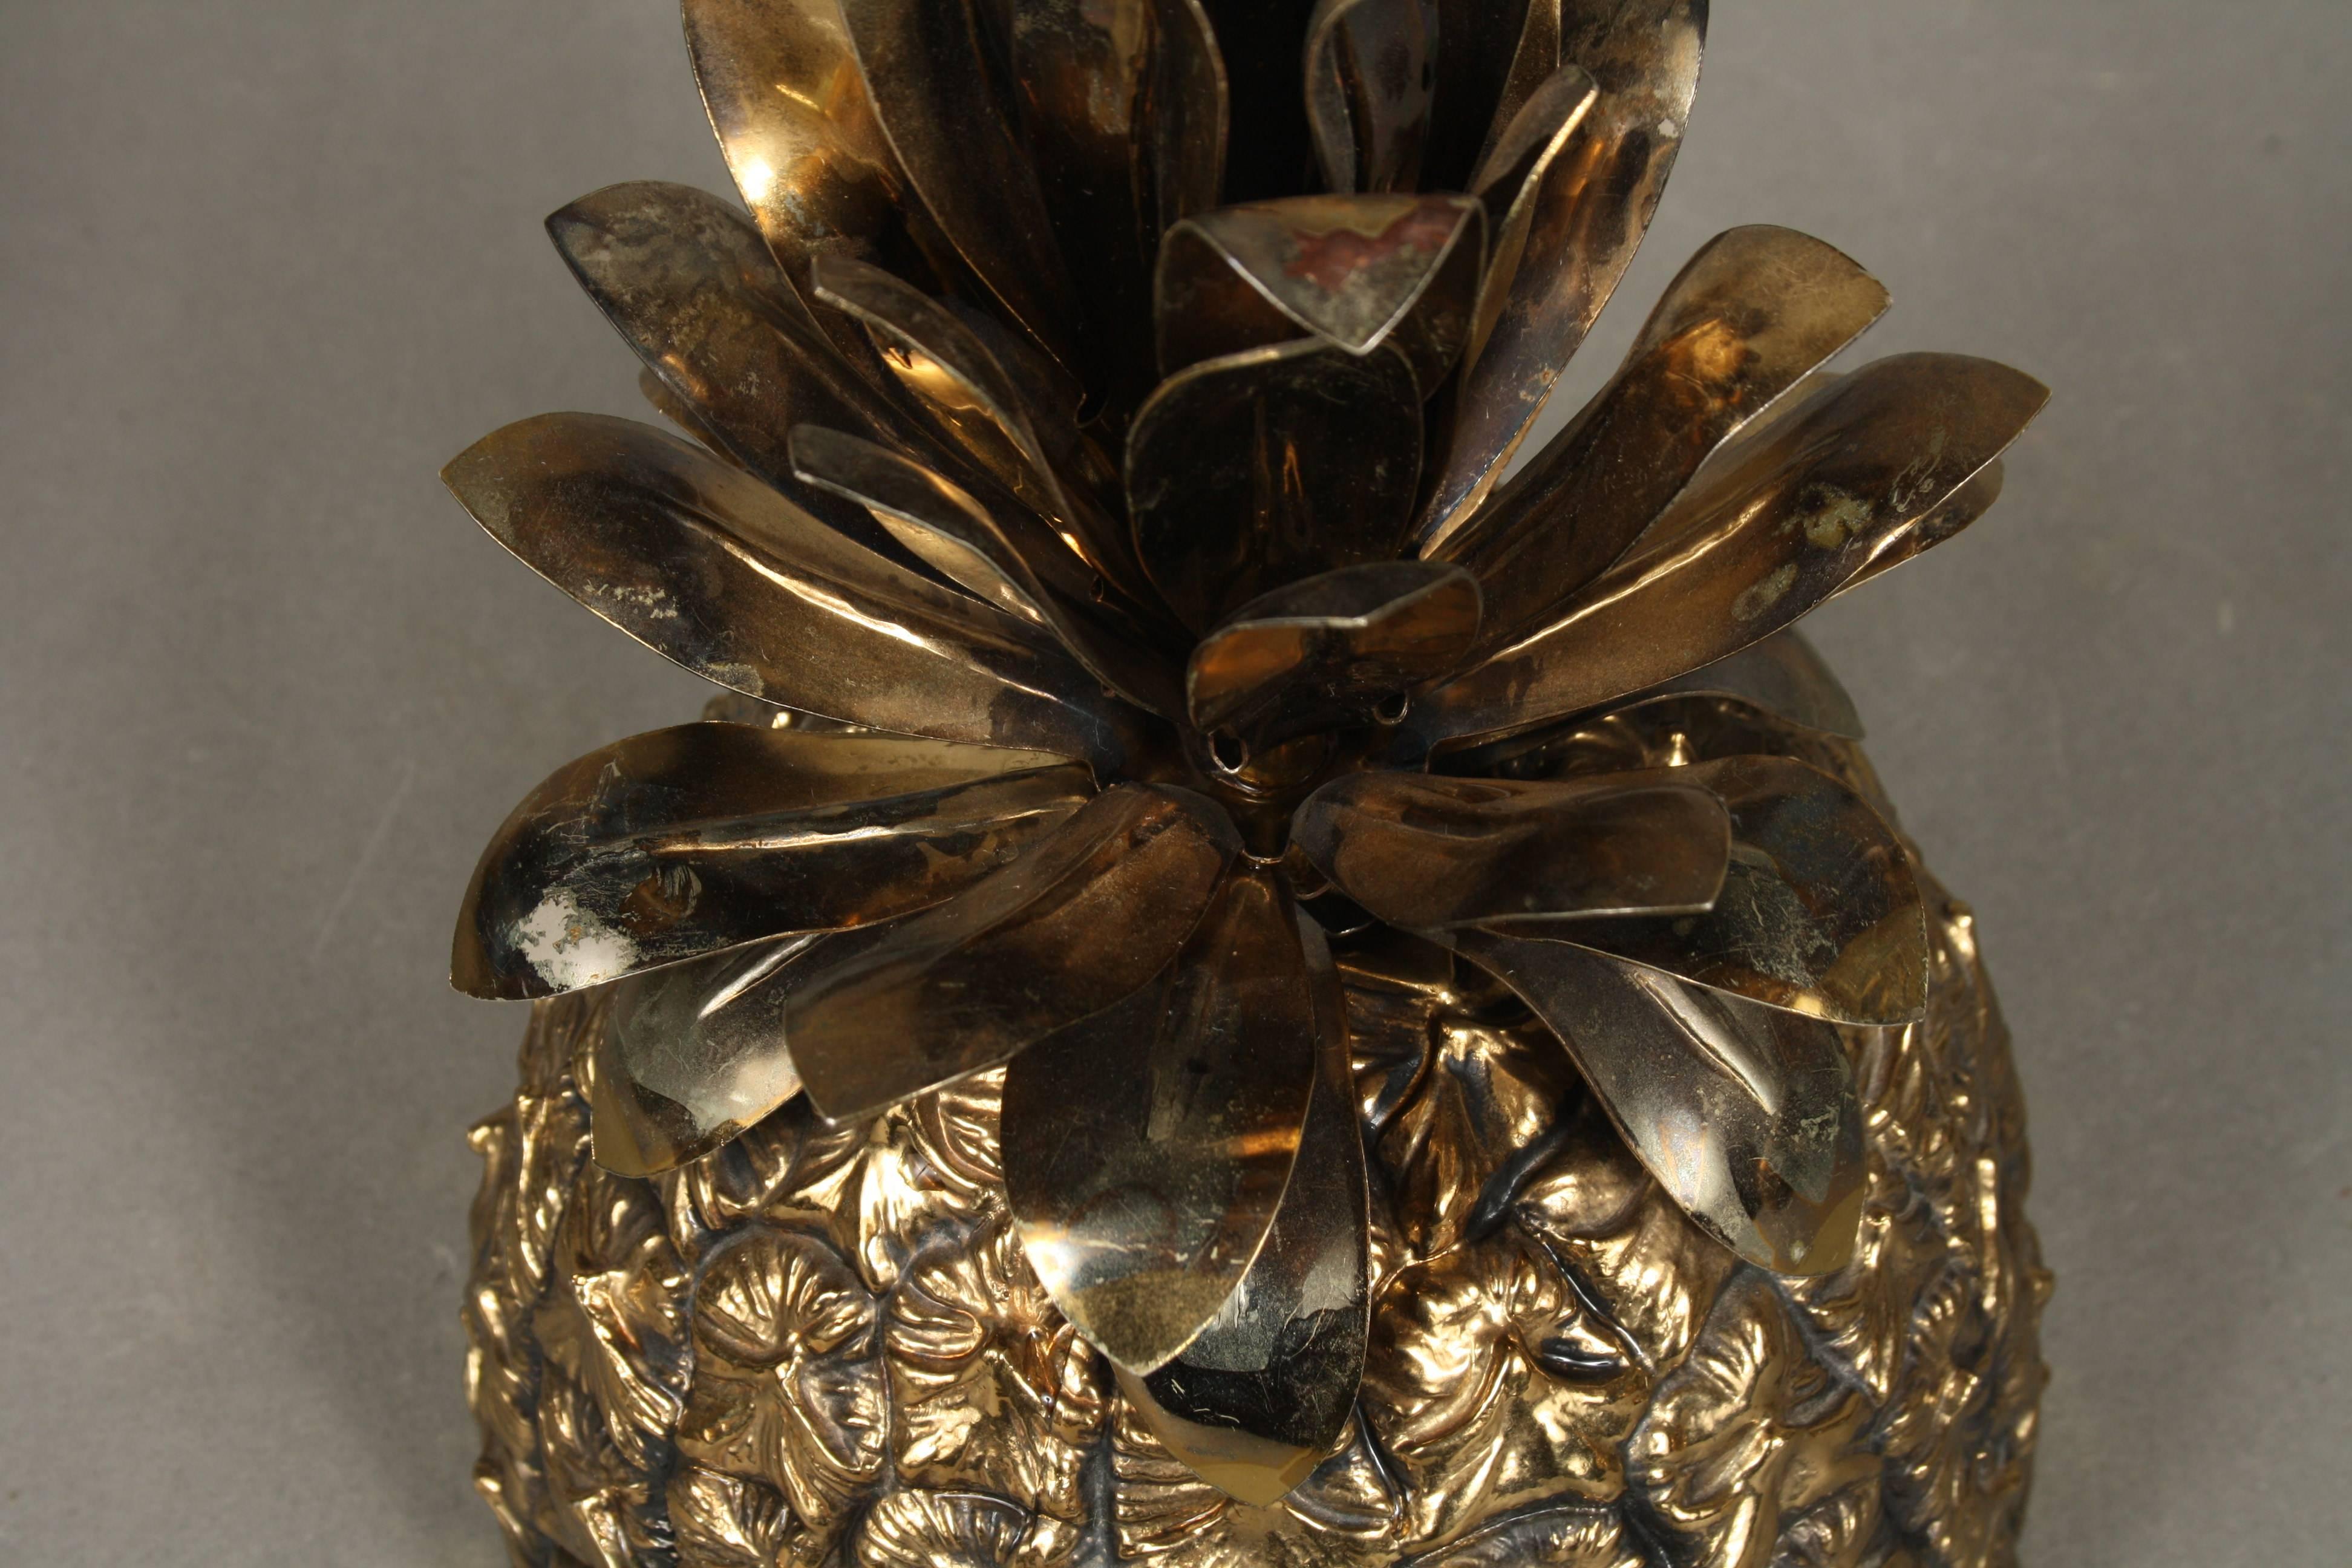 Metal Swiss Extra Large Gilt Colored Freddo Therm Pineapple Ice Bucket, 1960s For Sale